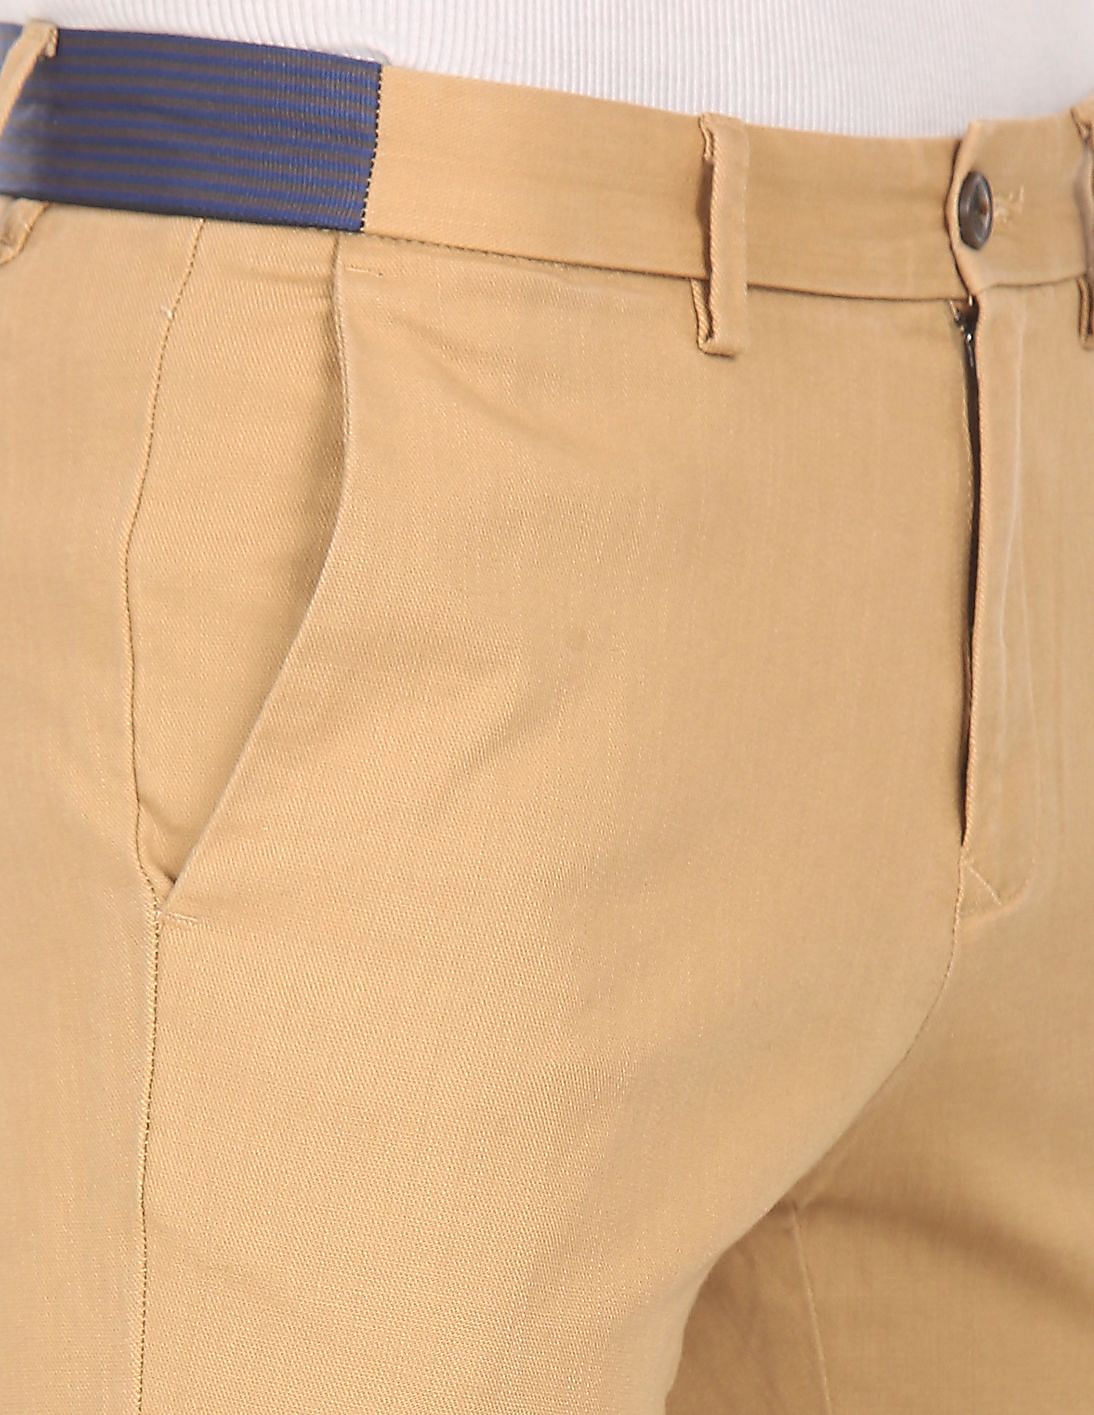 Mens Khaki Color Chinos Trouser, Size: 32-38 at Rs 325 in New Delhi